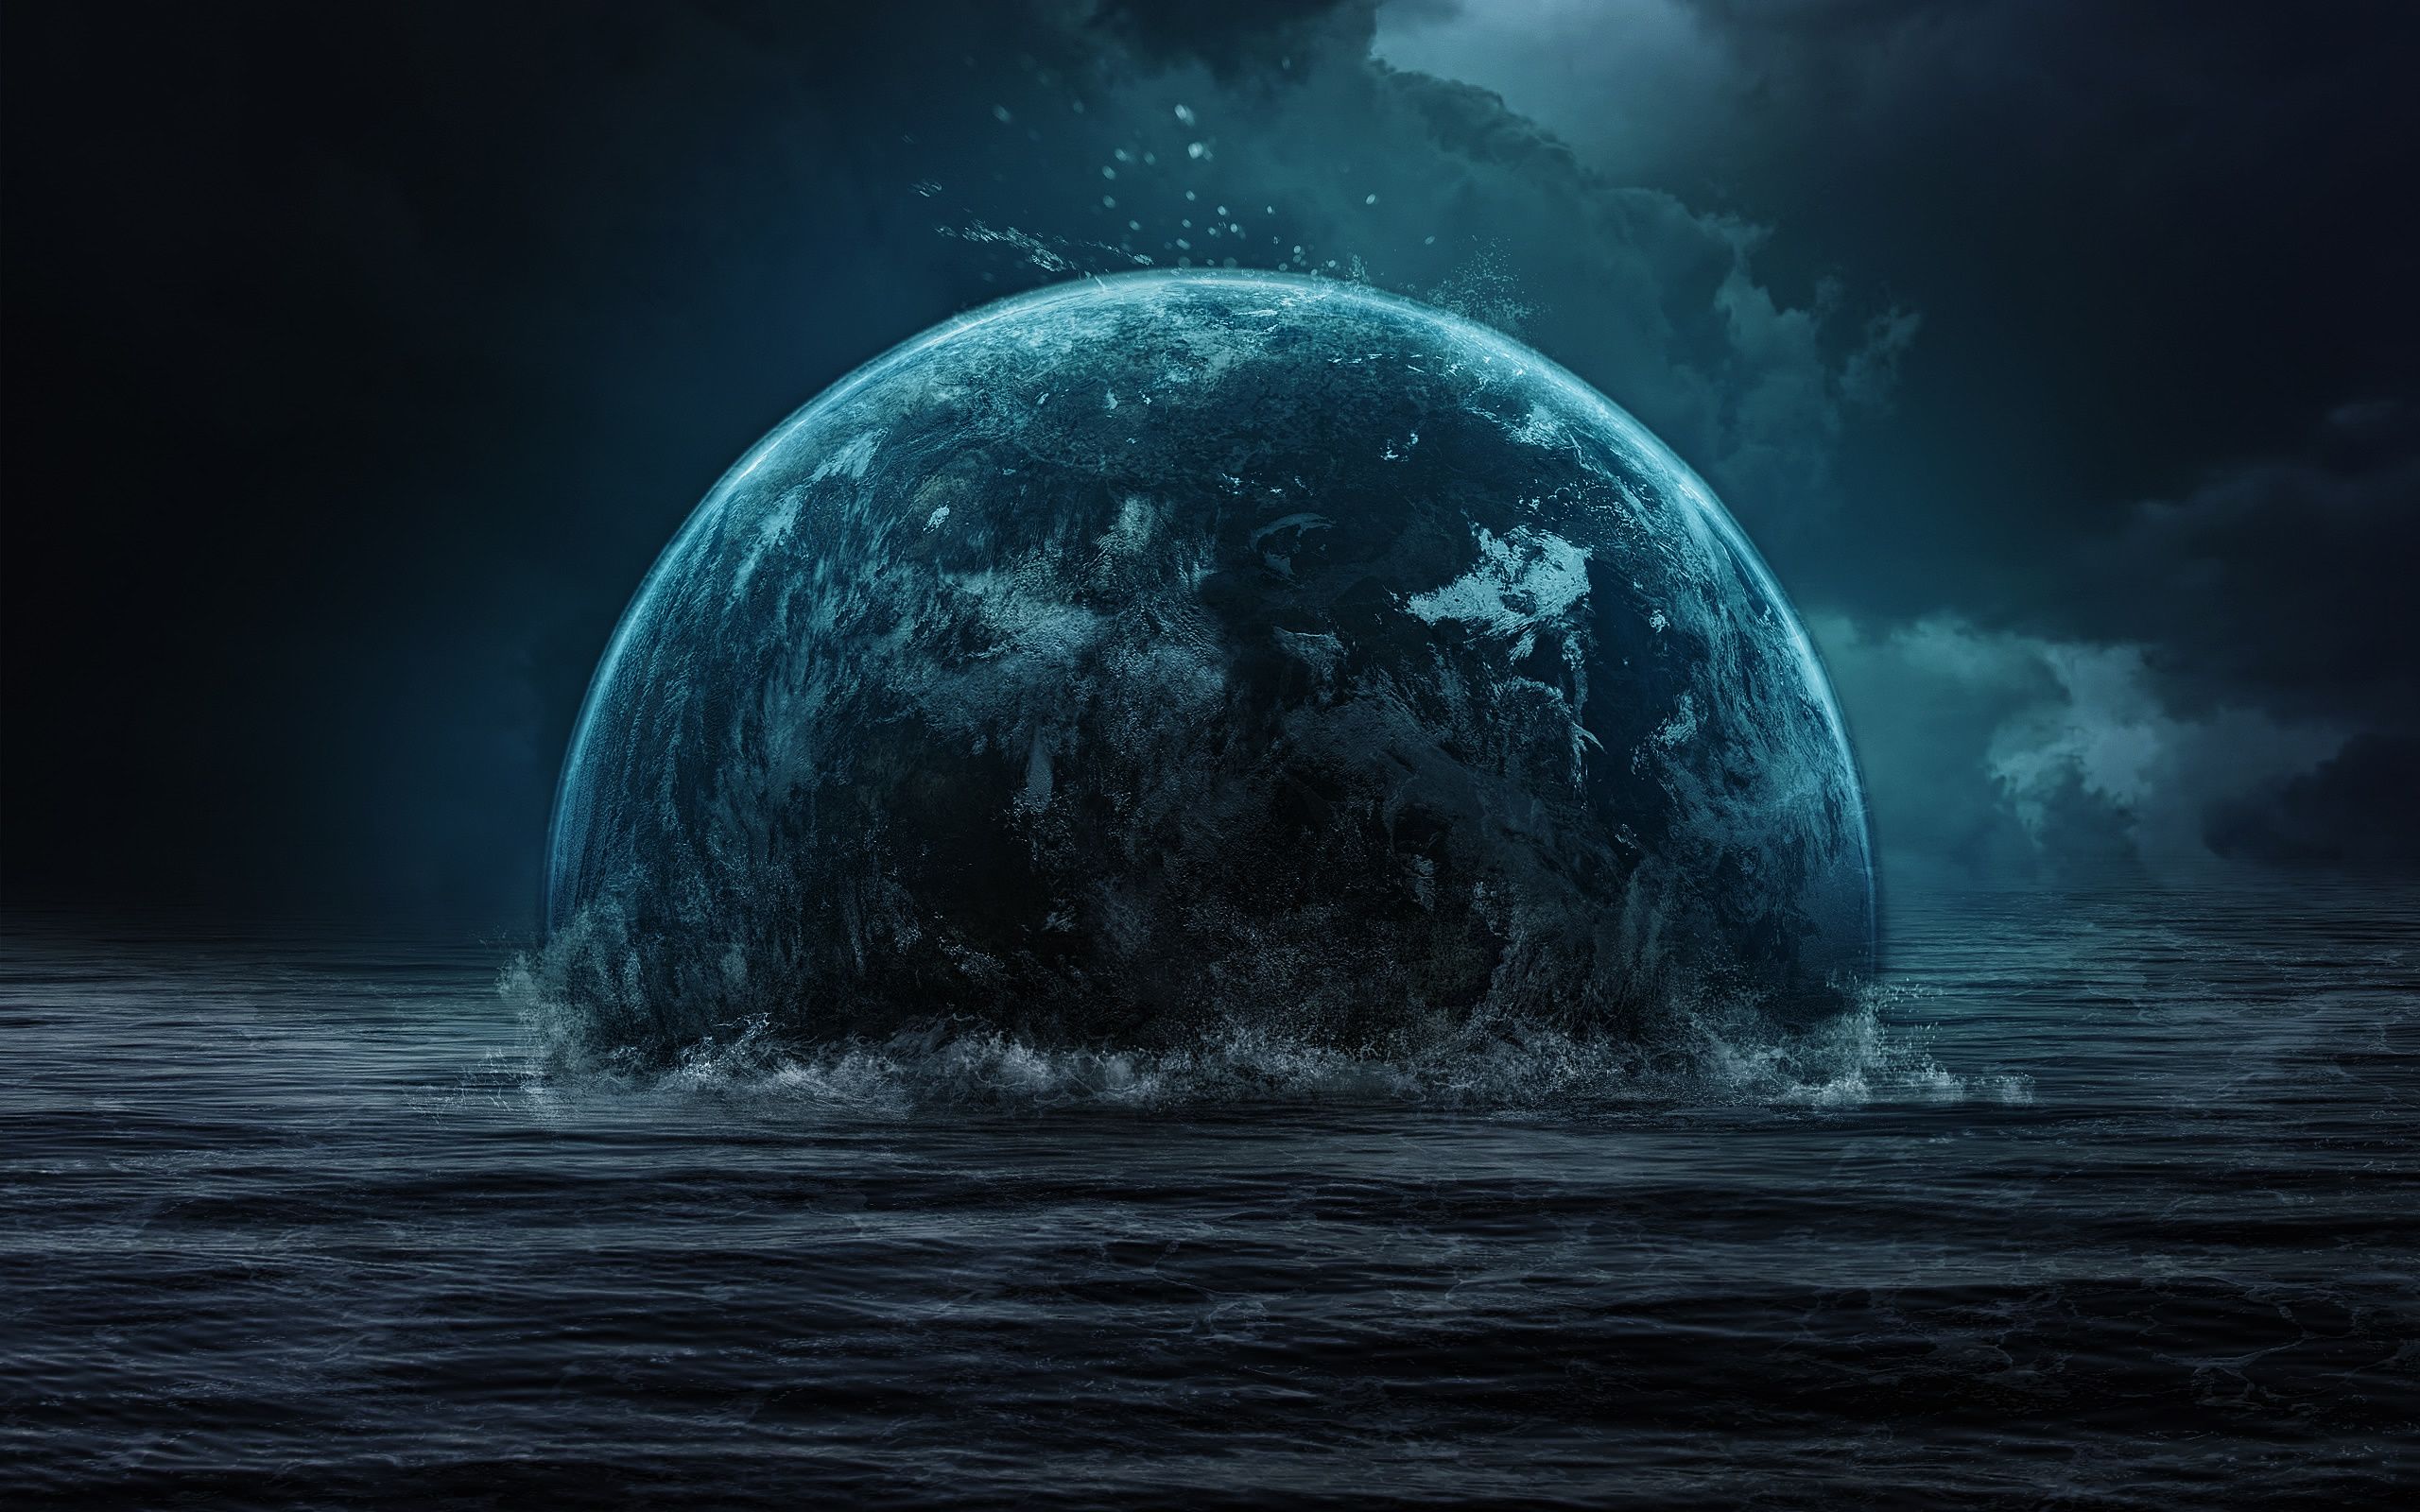 Space 3d art planet earth apocalyptic wallpaper | 2560x1600 ...